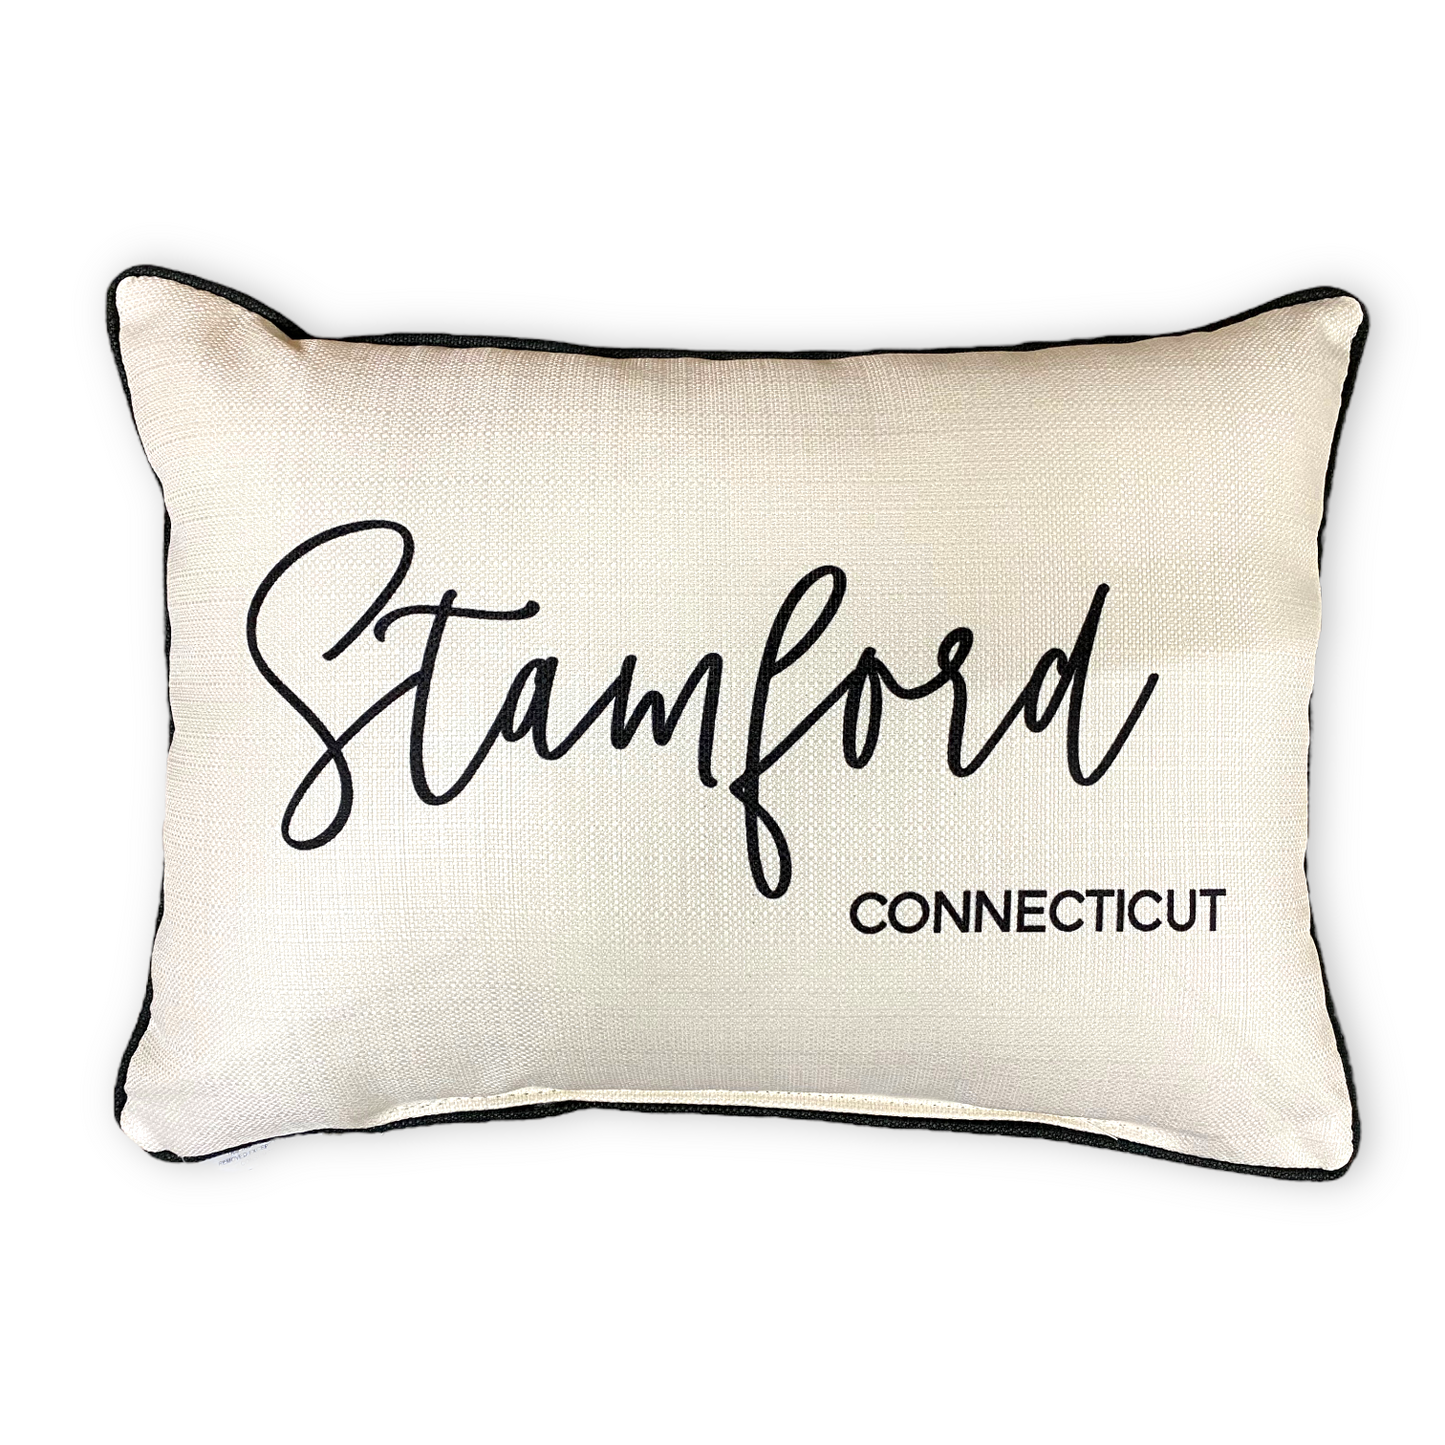 Stamford Connecticut Throw Pillow with Pinot Script and Black Piping 